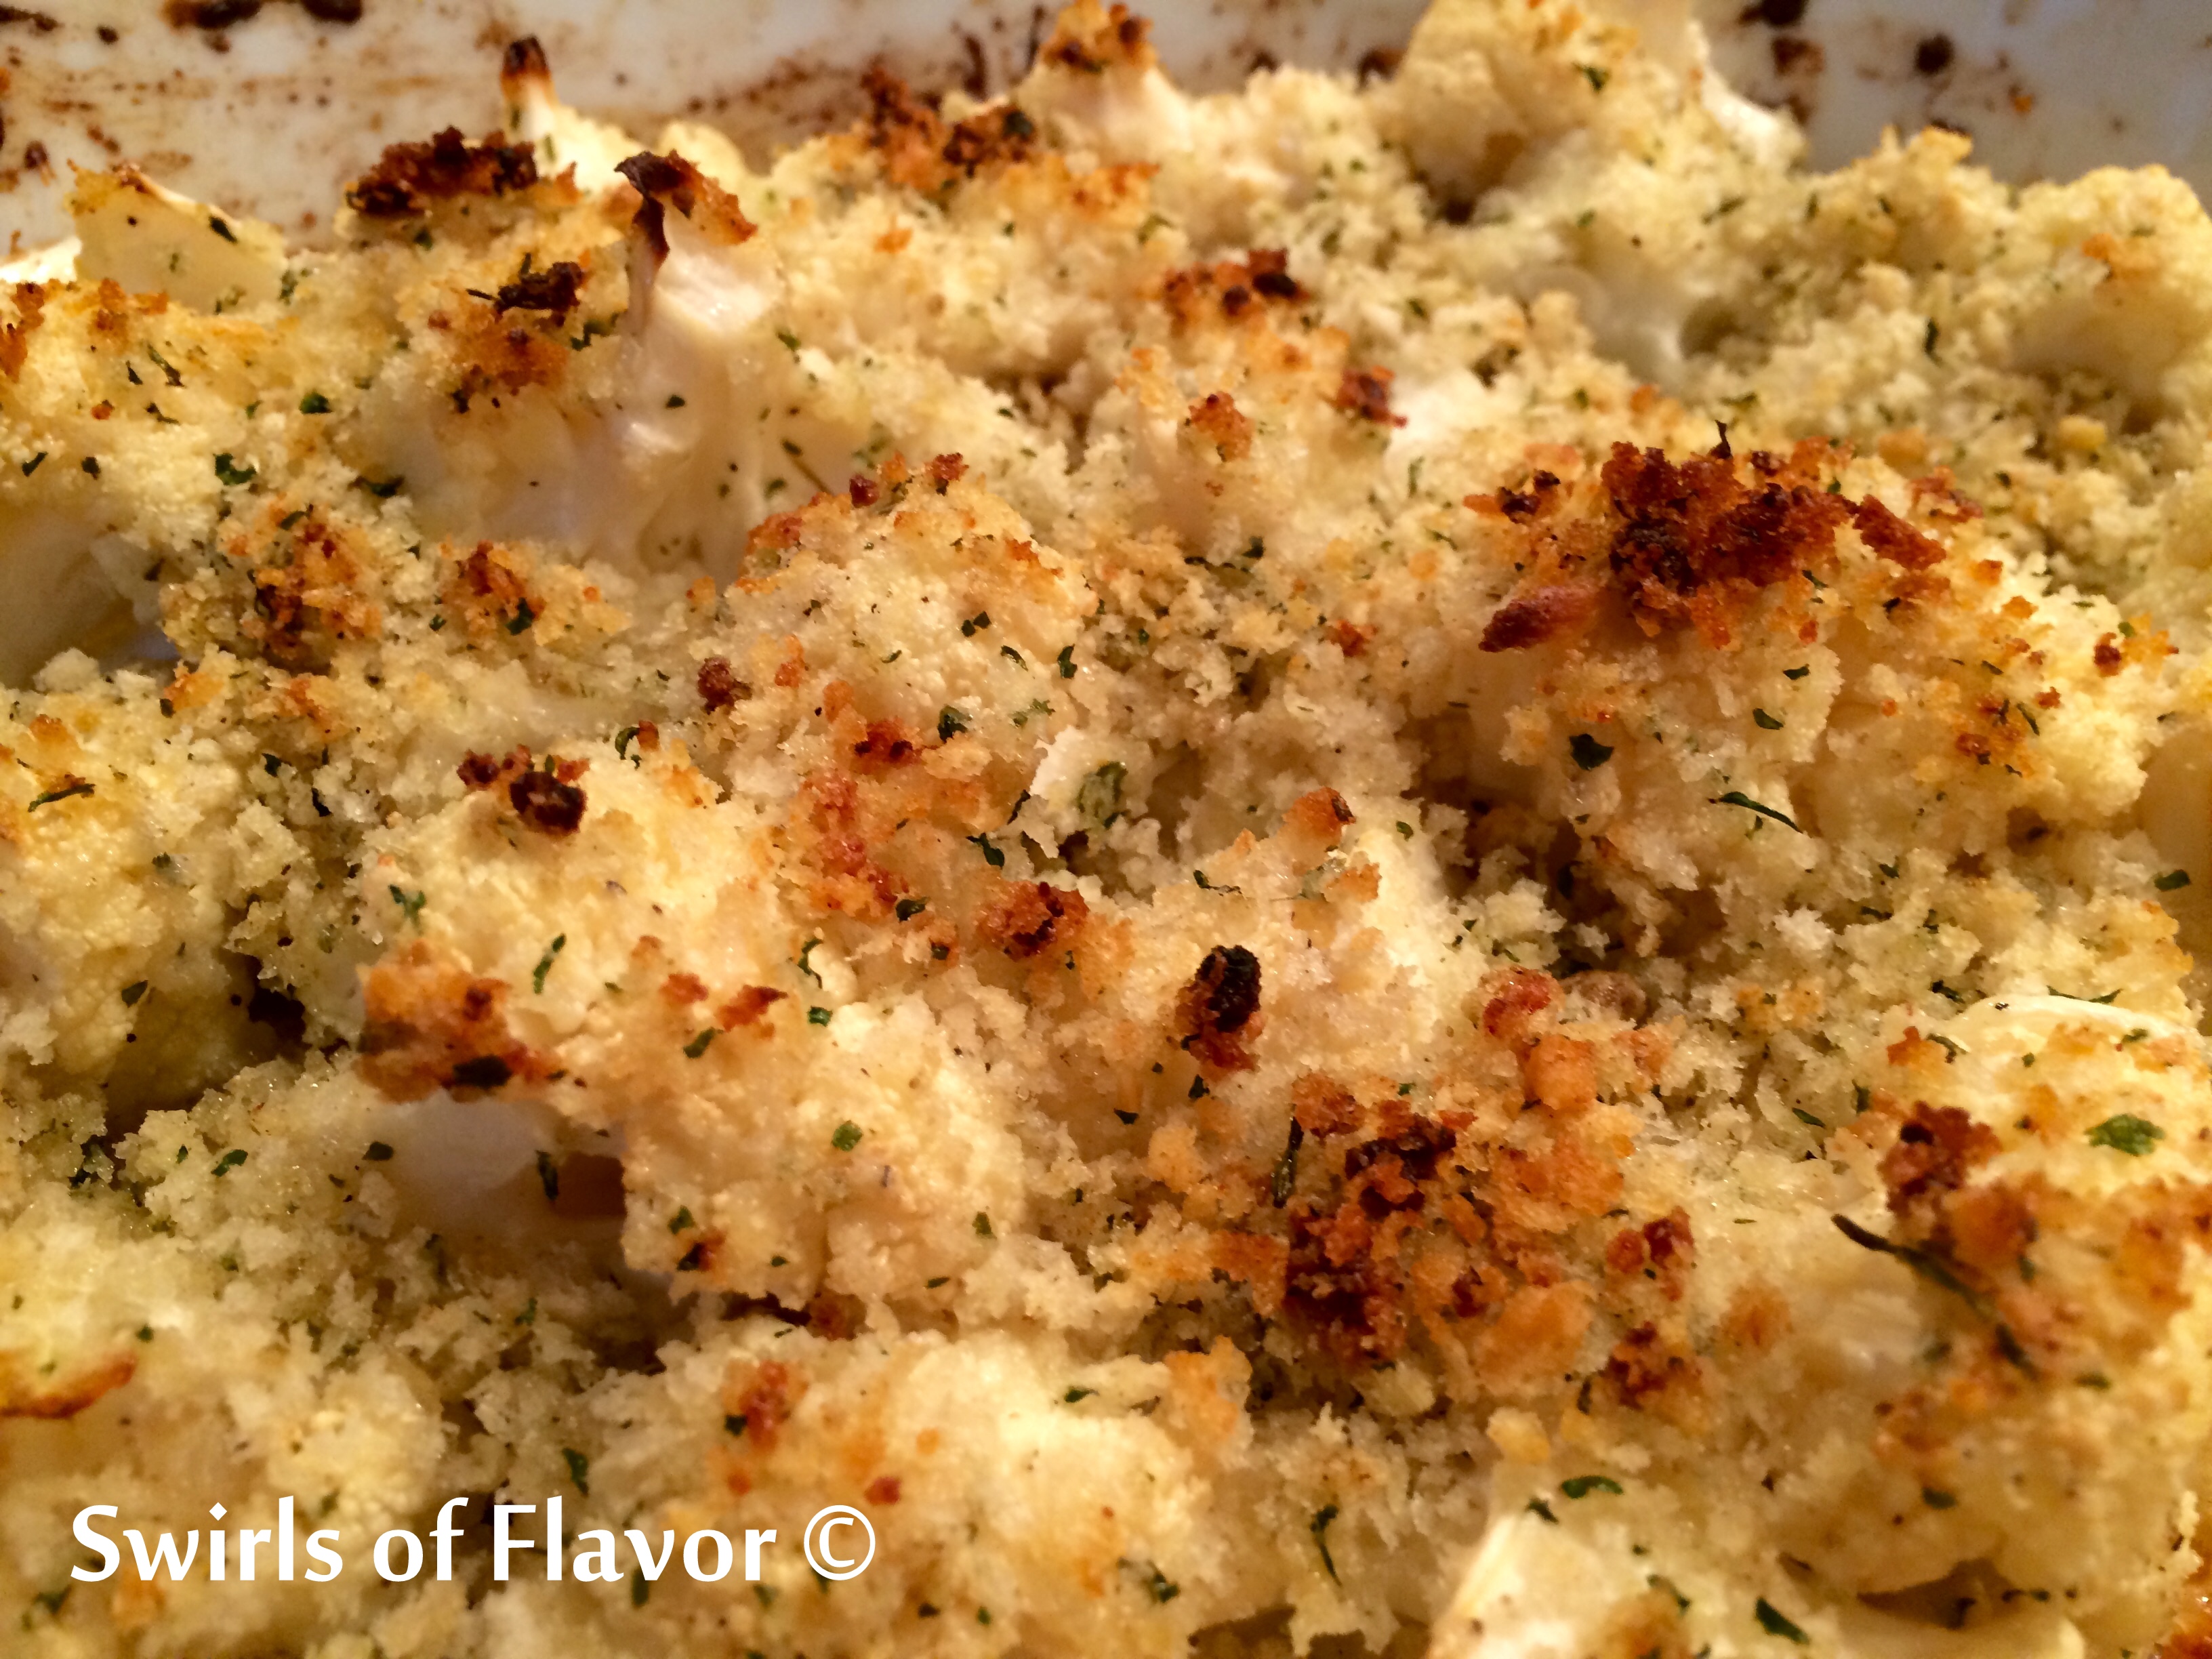 Buttered Ranch Cauliflower is bursting with buttery goodness and flavor! Just four ingredients will get you a delicious easy side dish that will quickly become a go-to recipe! cauliflower | easy recipe | side dish | ranch | ranch seasoning | baked cauliflower | casserole | #swirlsofflavor